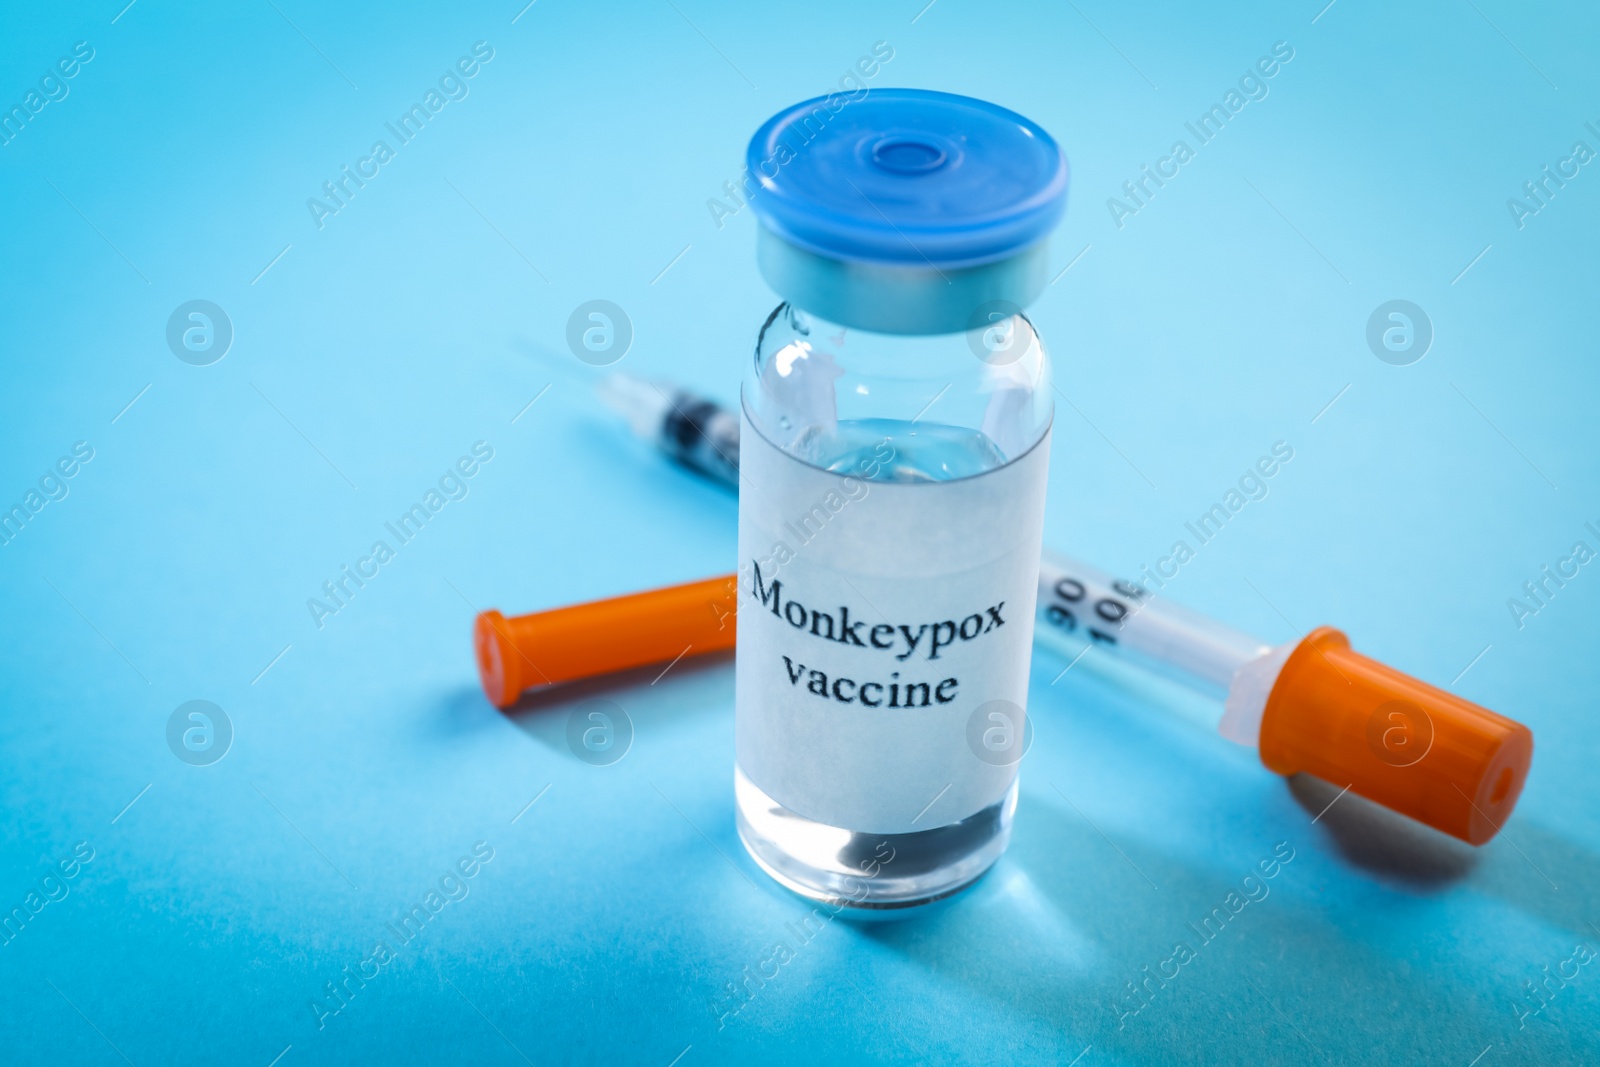 Photo of Monkeypox vaccine in glass vial and syringe on light blue background, space for text